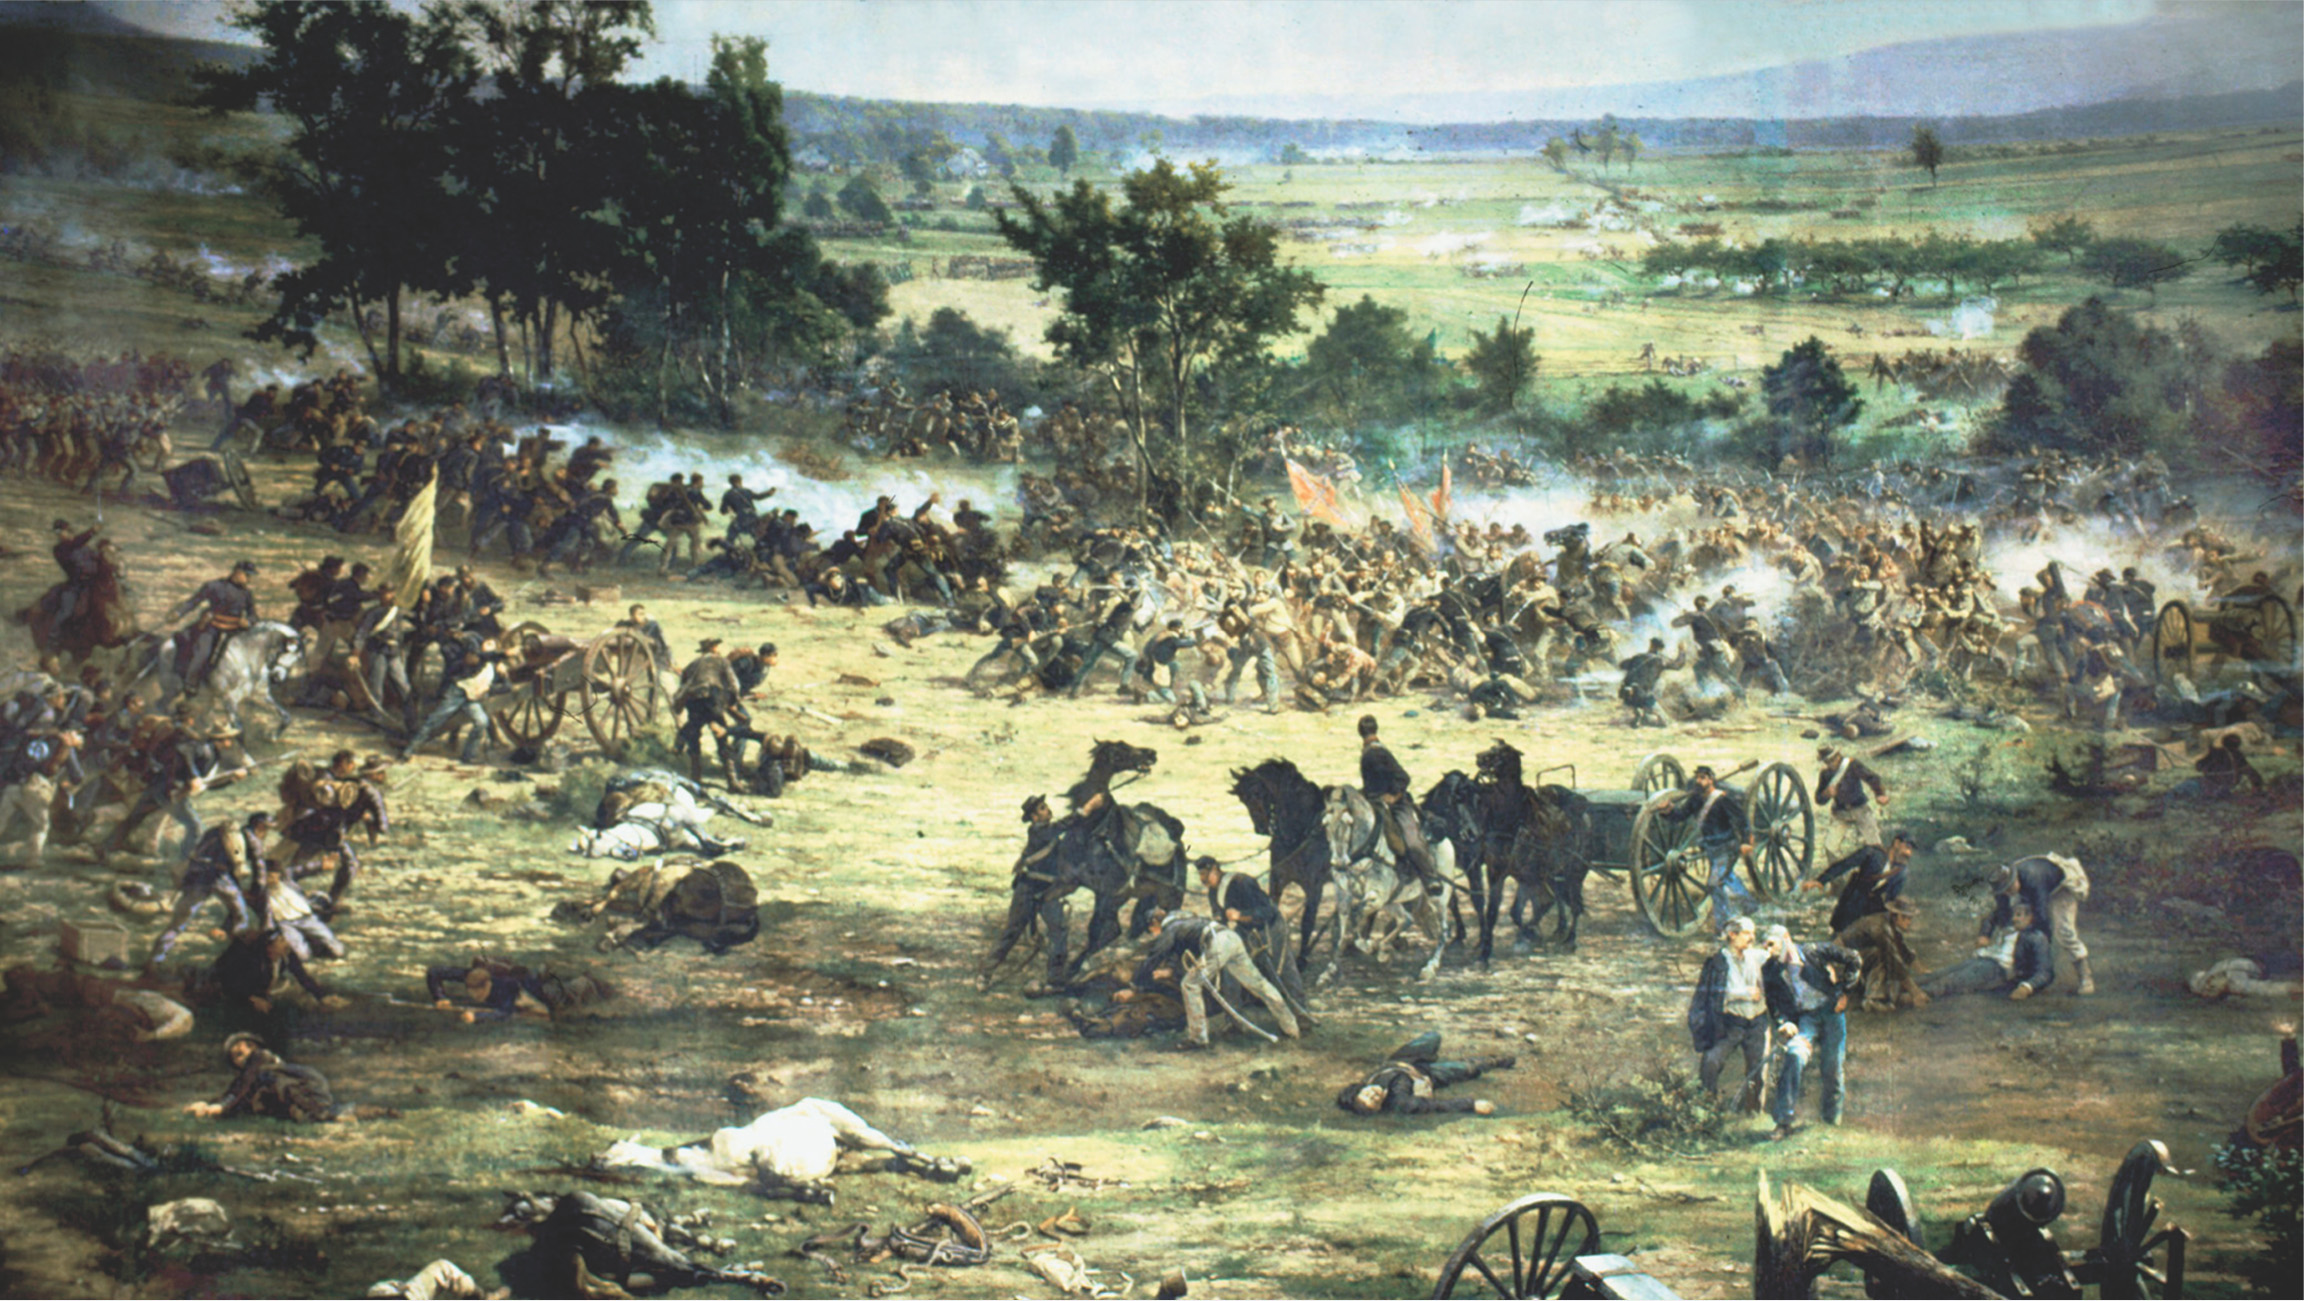 In the painting rifle smoke surrounds the armies as pposing lines fire at each other. Confederates charge past a Union line, toward a cannon. Dead men and horses lie on the battlefield.